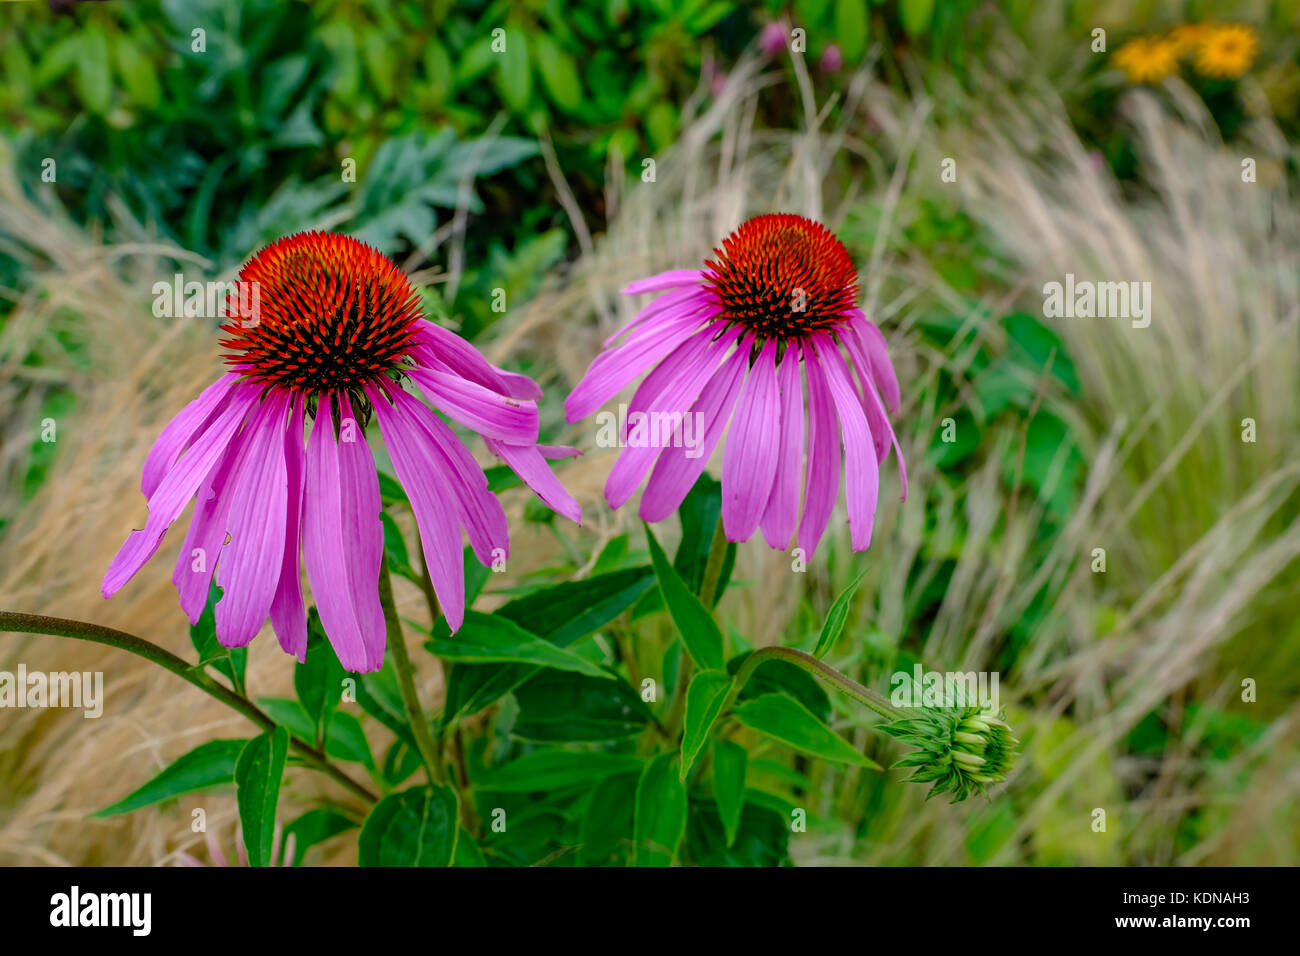 Echinacea Purpurea Magnus, two perfect cone flowers in a close-up shot. Shot taken in summer with foliage. Stock Photo